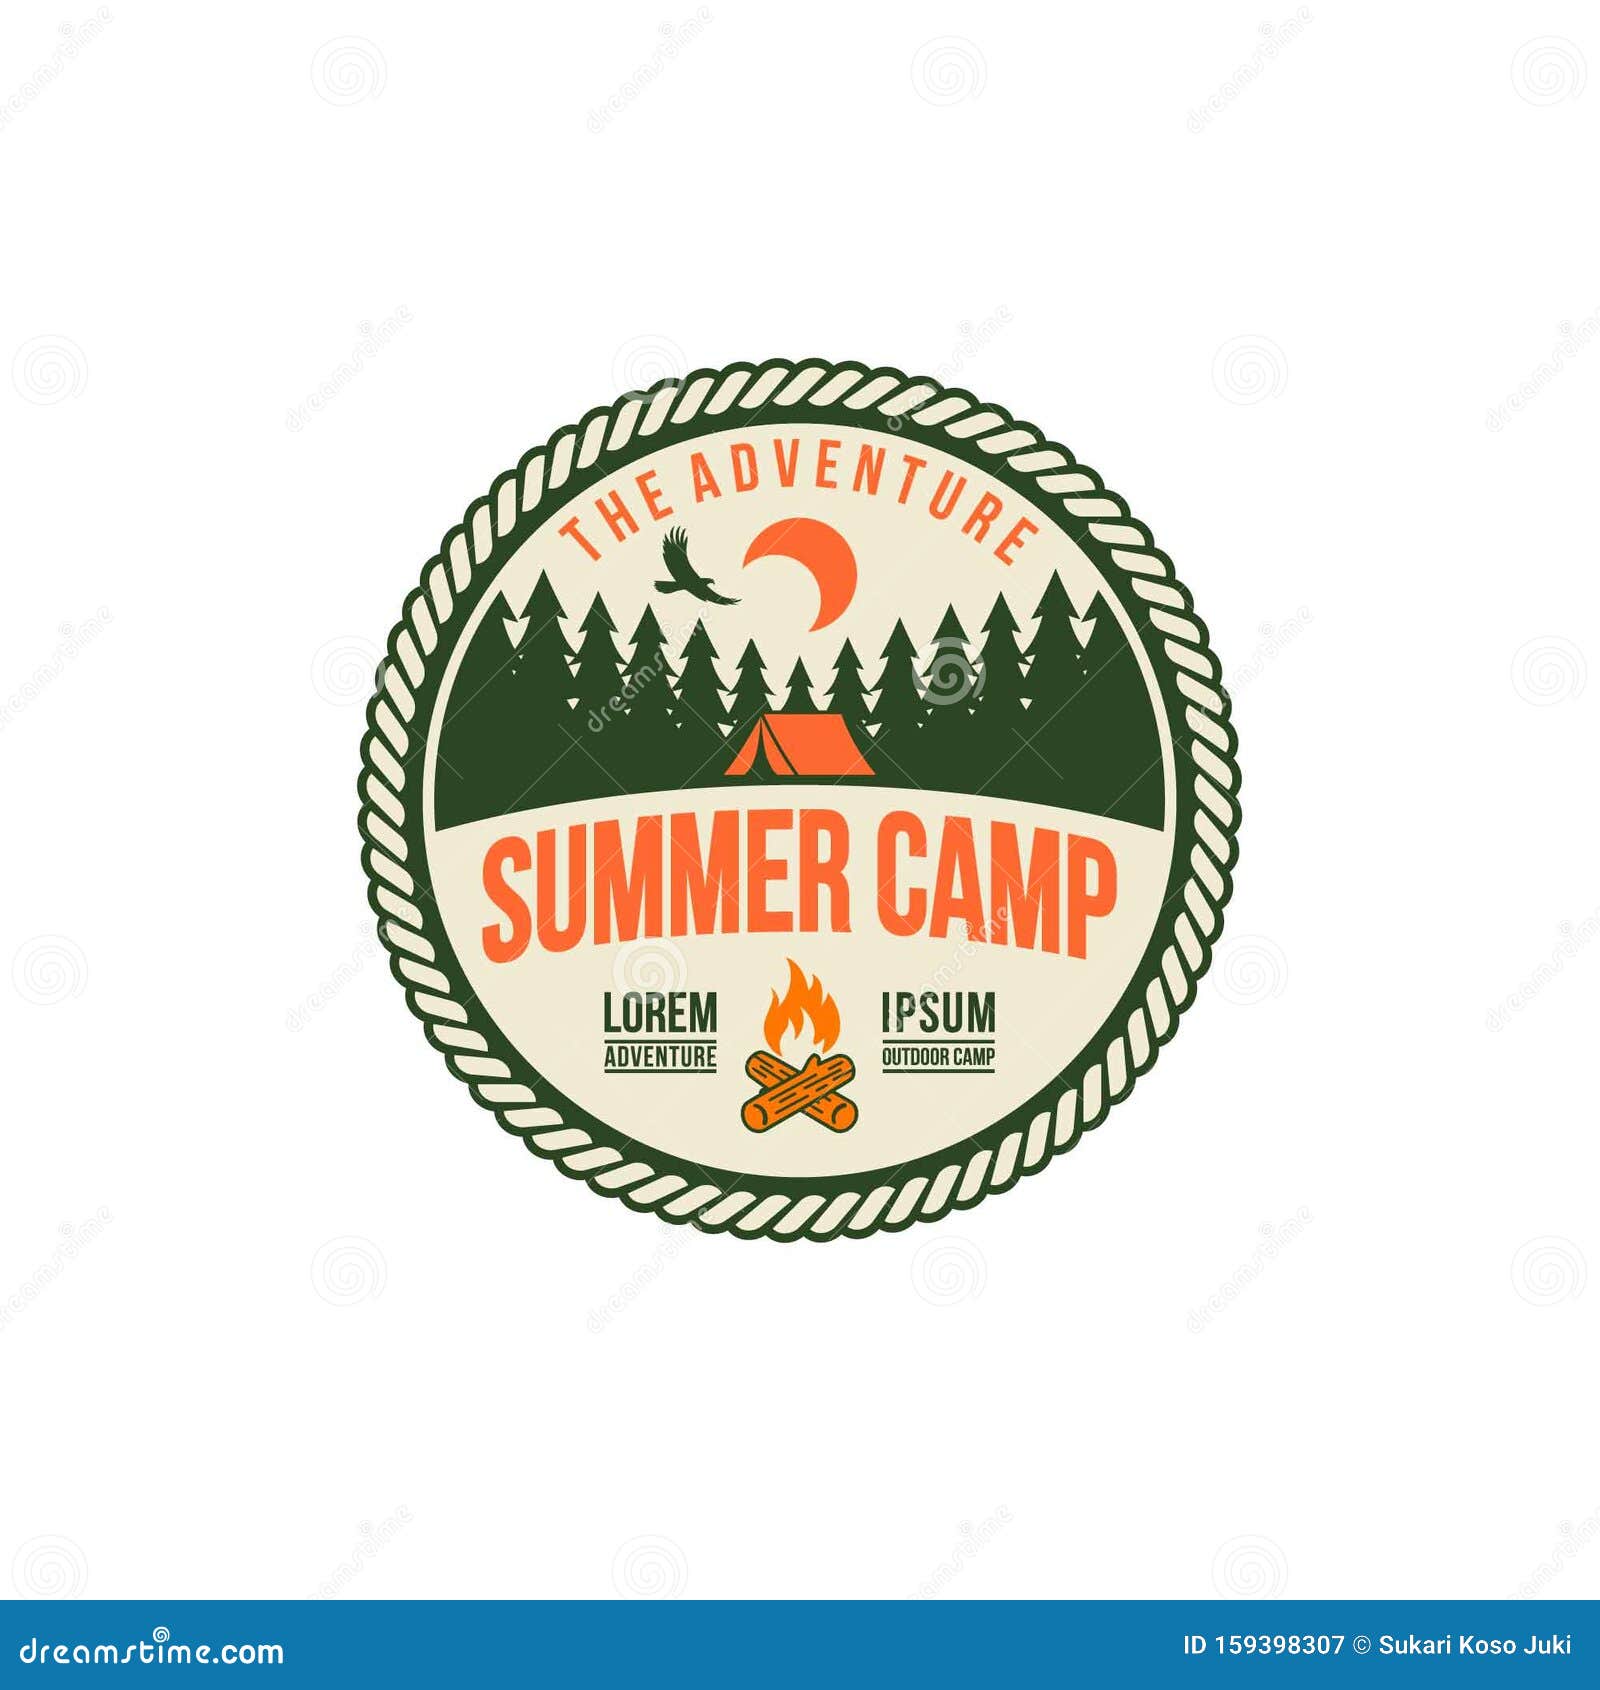 Vintage Summer Camp Logo Template Stock Vector Illustration Of Classic Backpacking